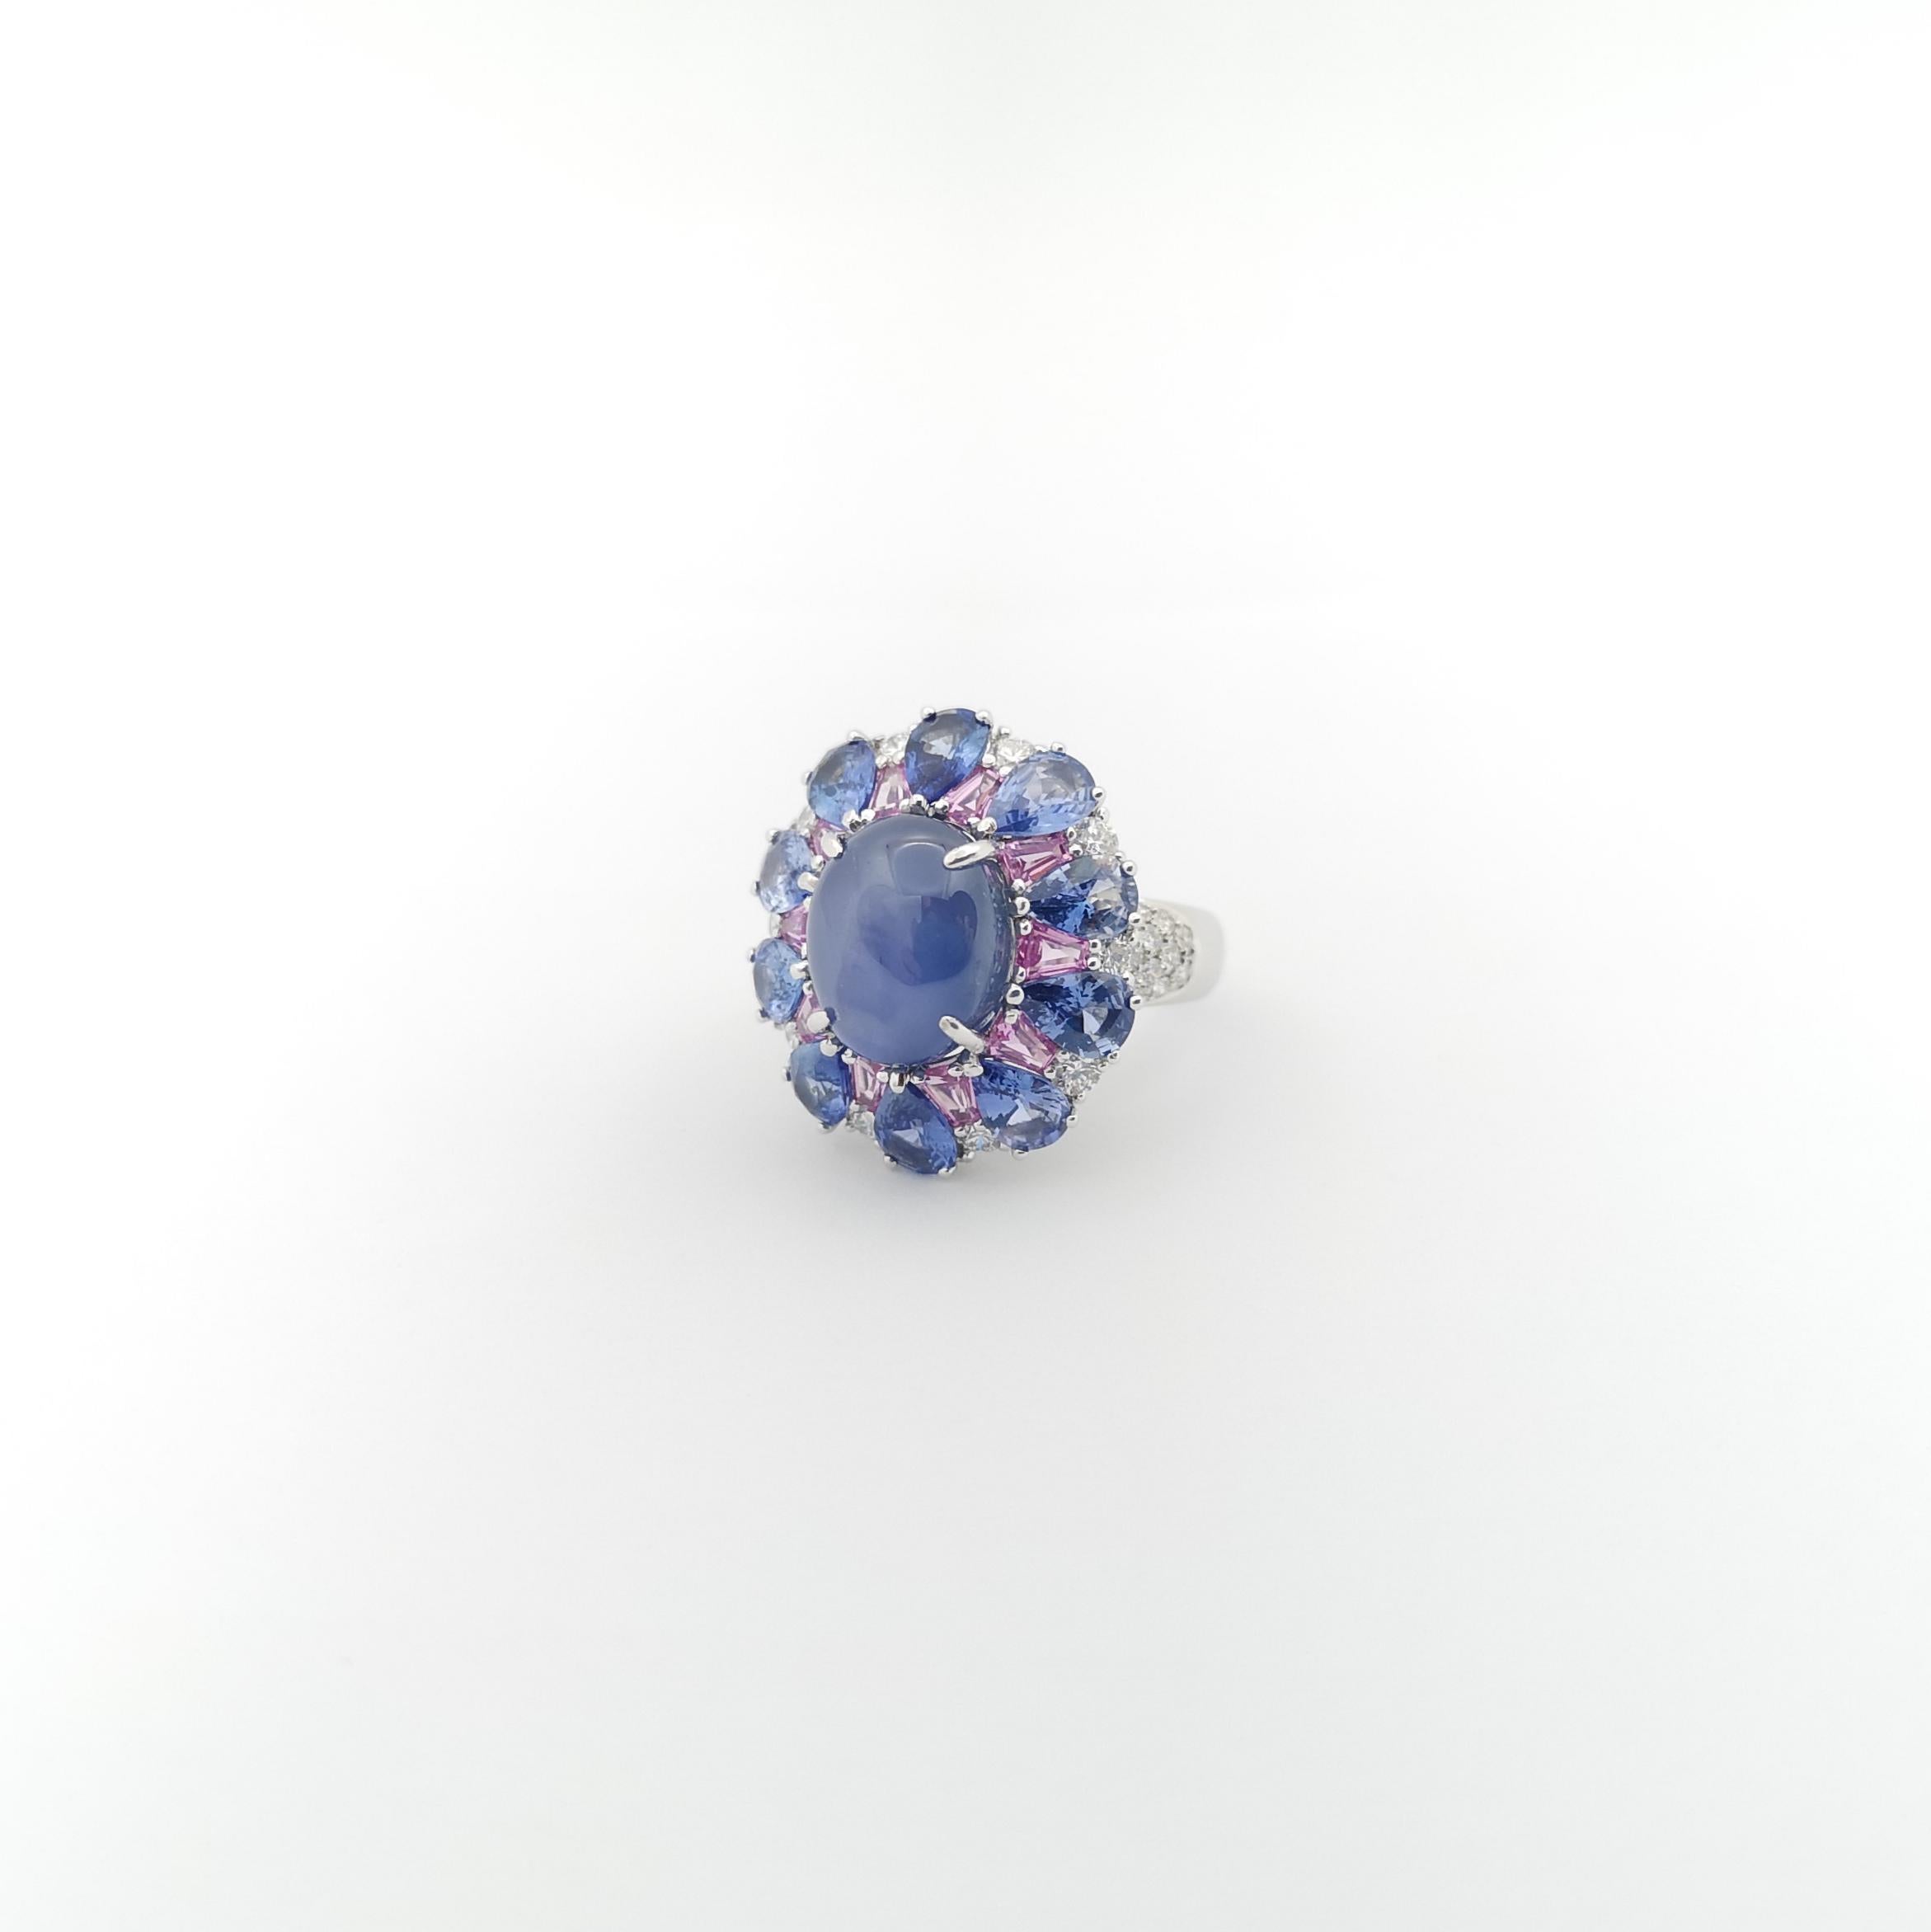 Blue Star Sapphire, Blue Sapphire, Pink Sapphire and Diamond Ring 18K White Gold For Sale 7